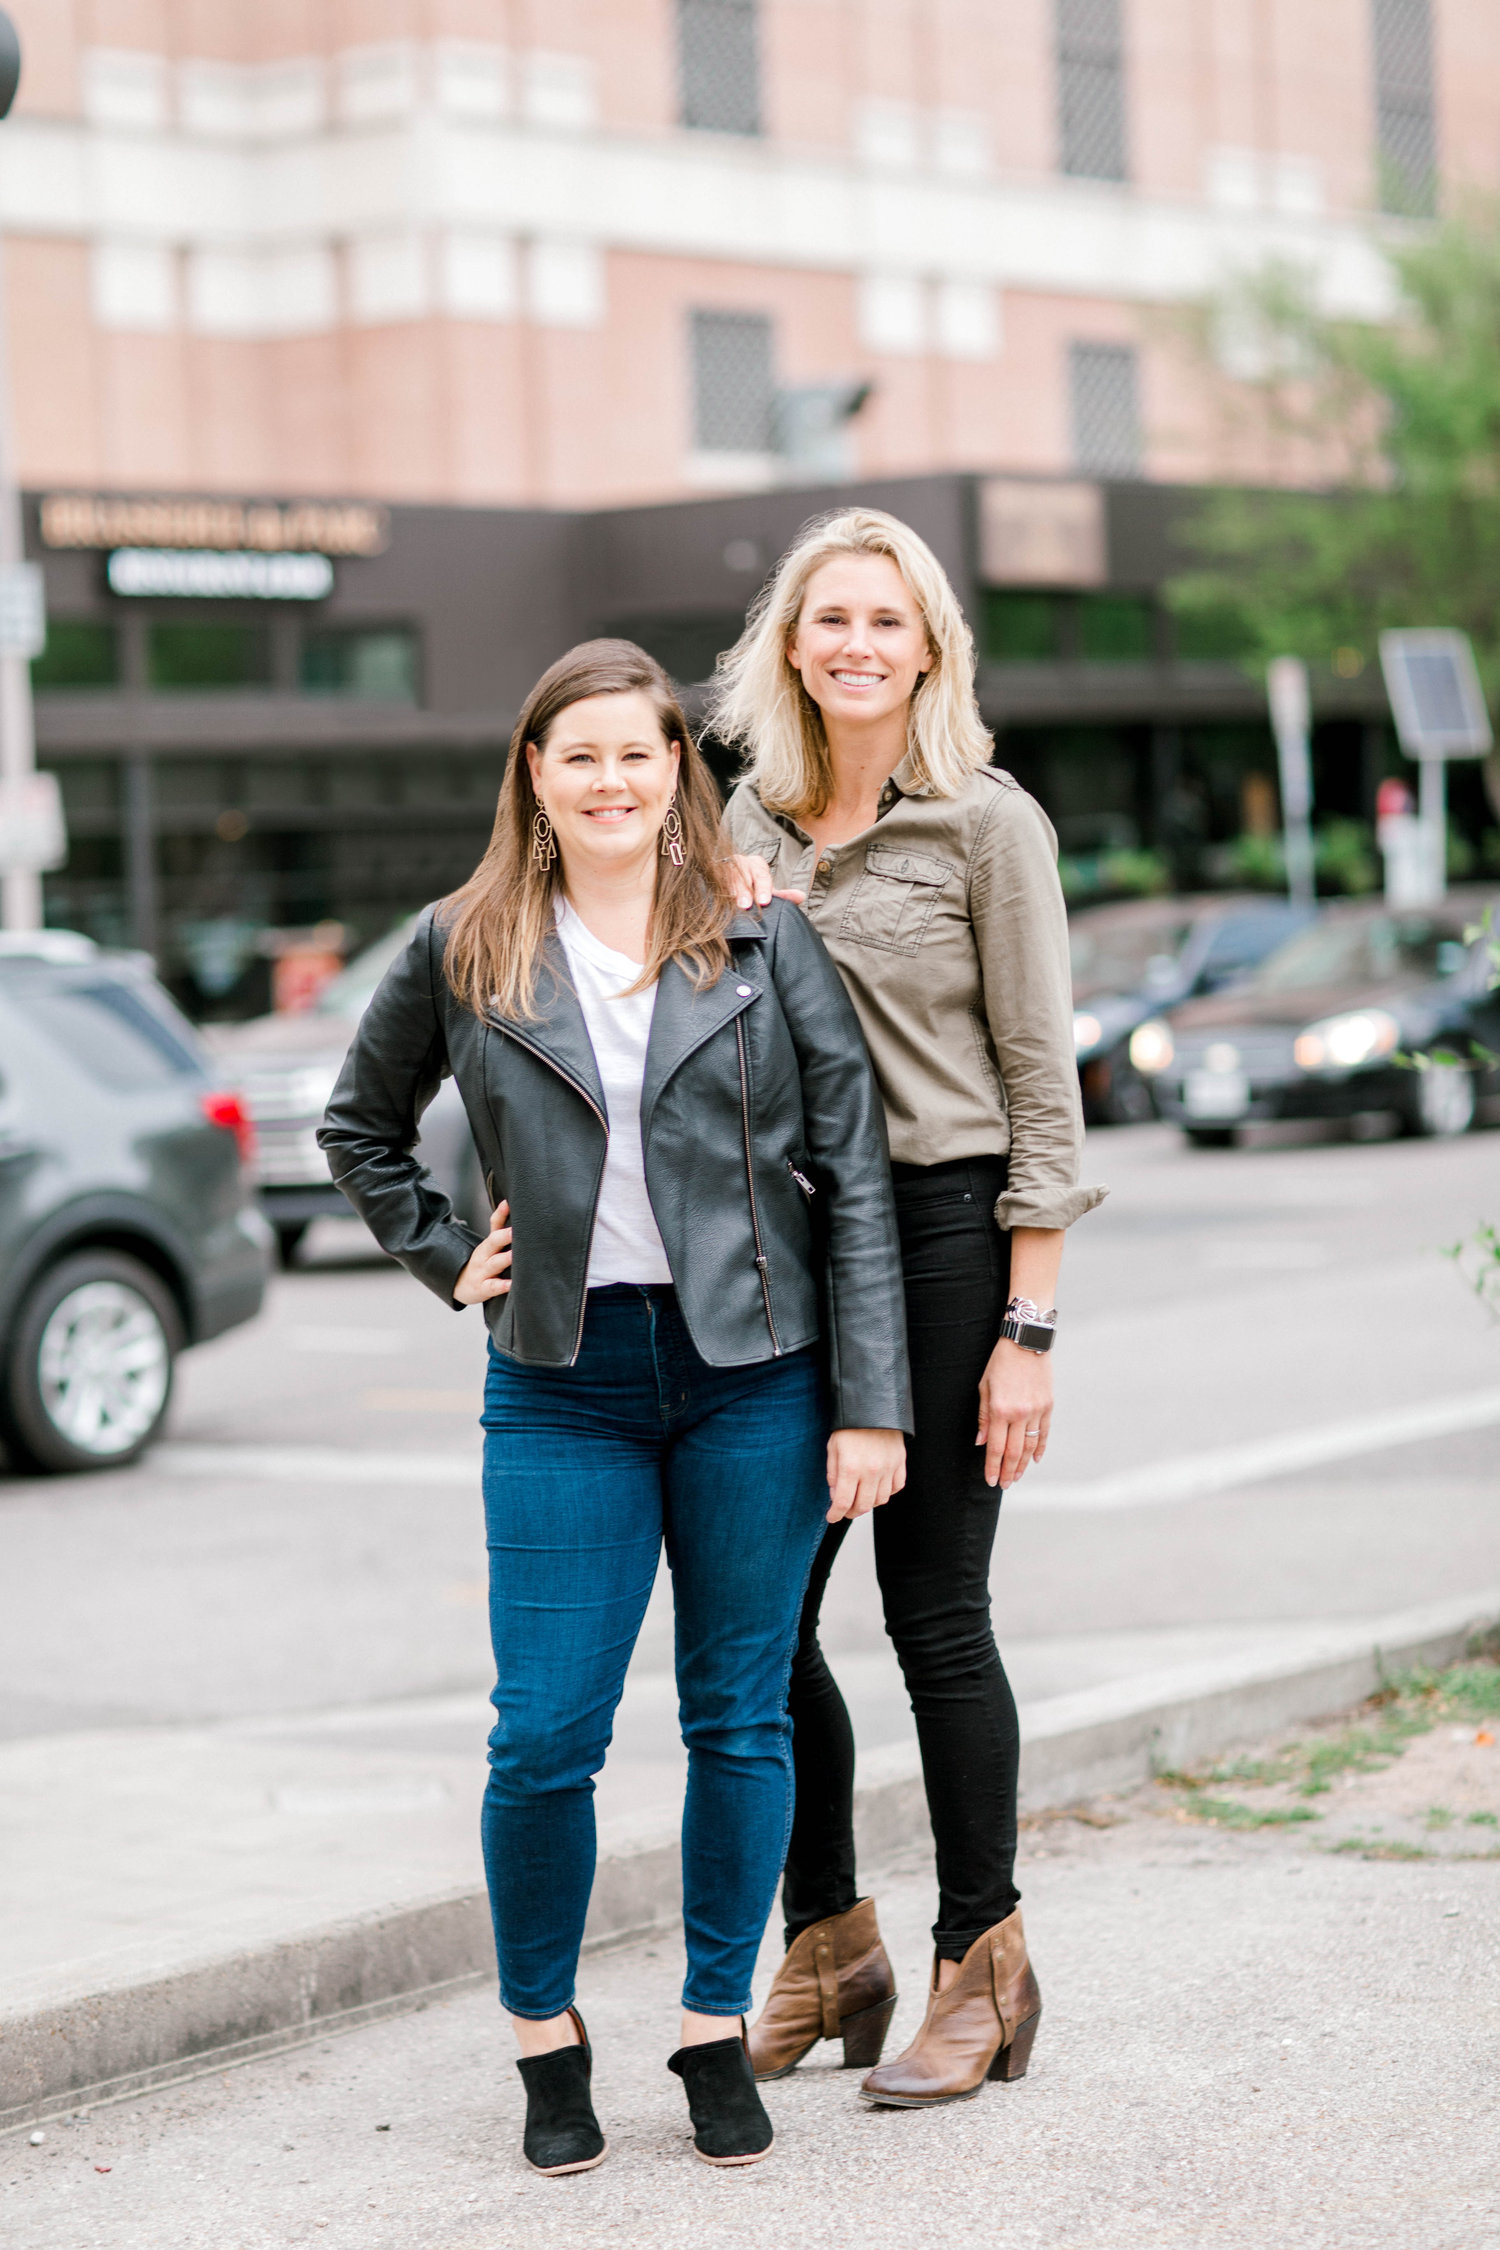 Meredith Wheeler & Maggie Segrich, Houston's First Female-Focused Coworking Game-Changers | Sesh Coworking